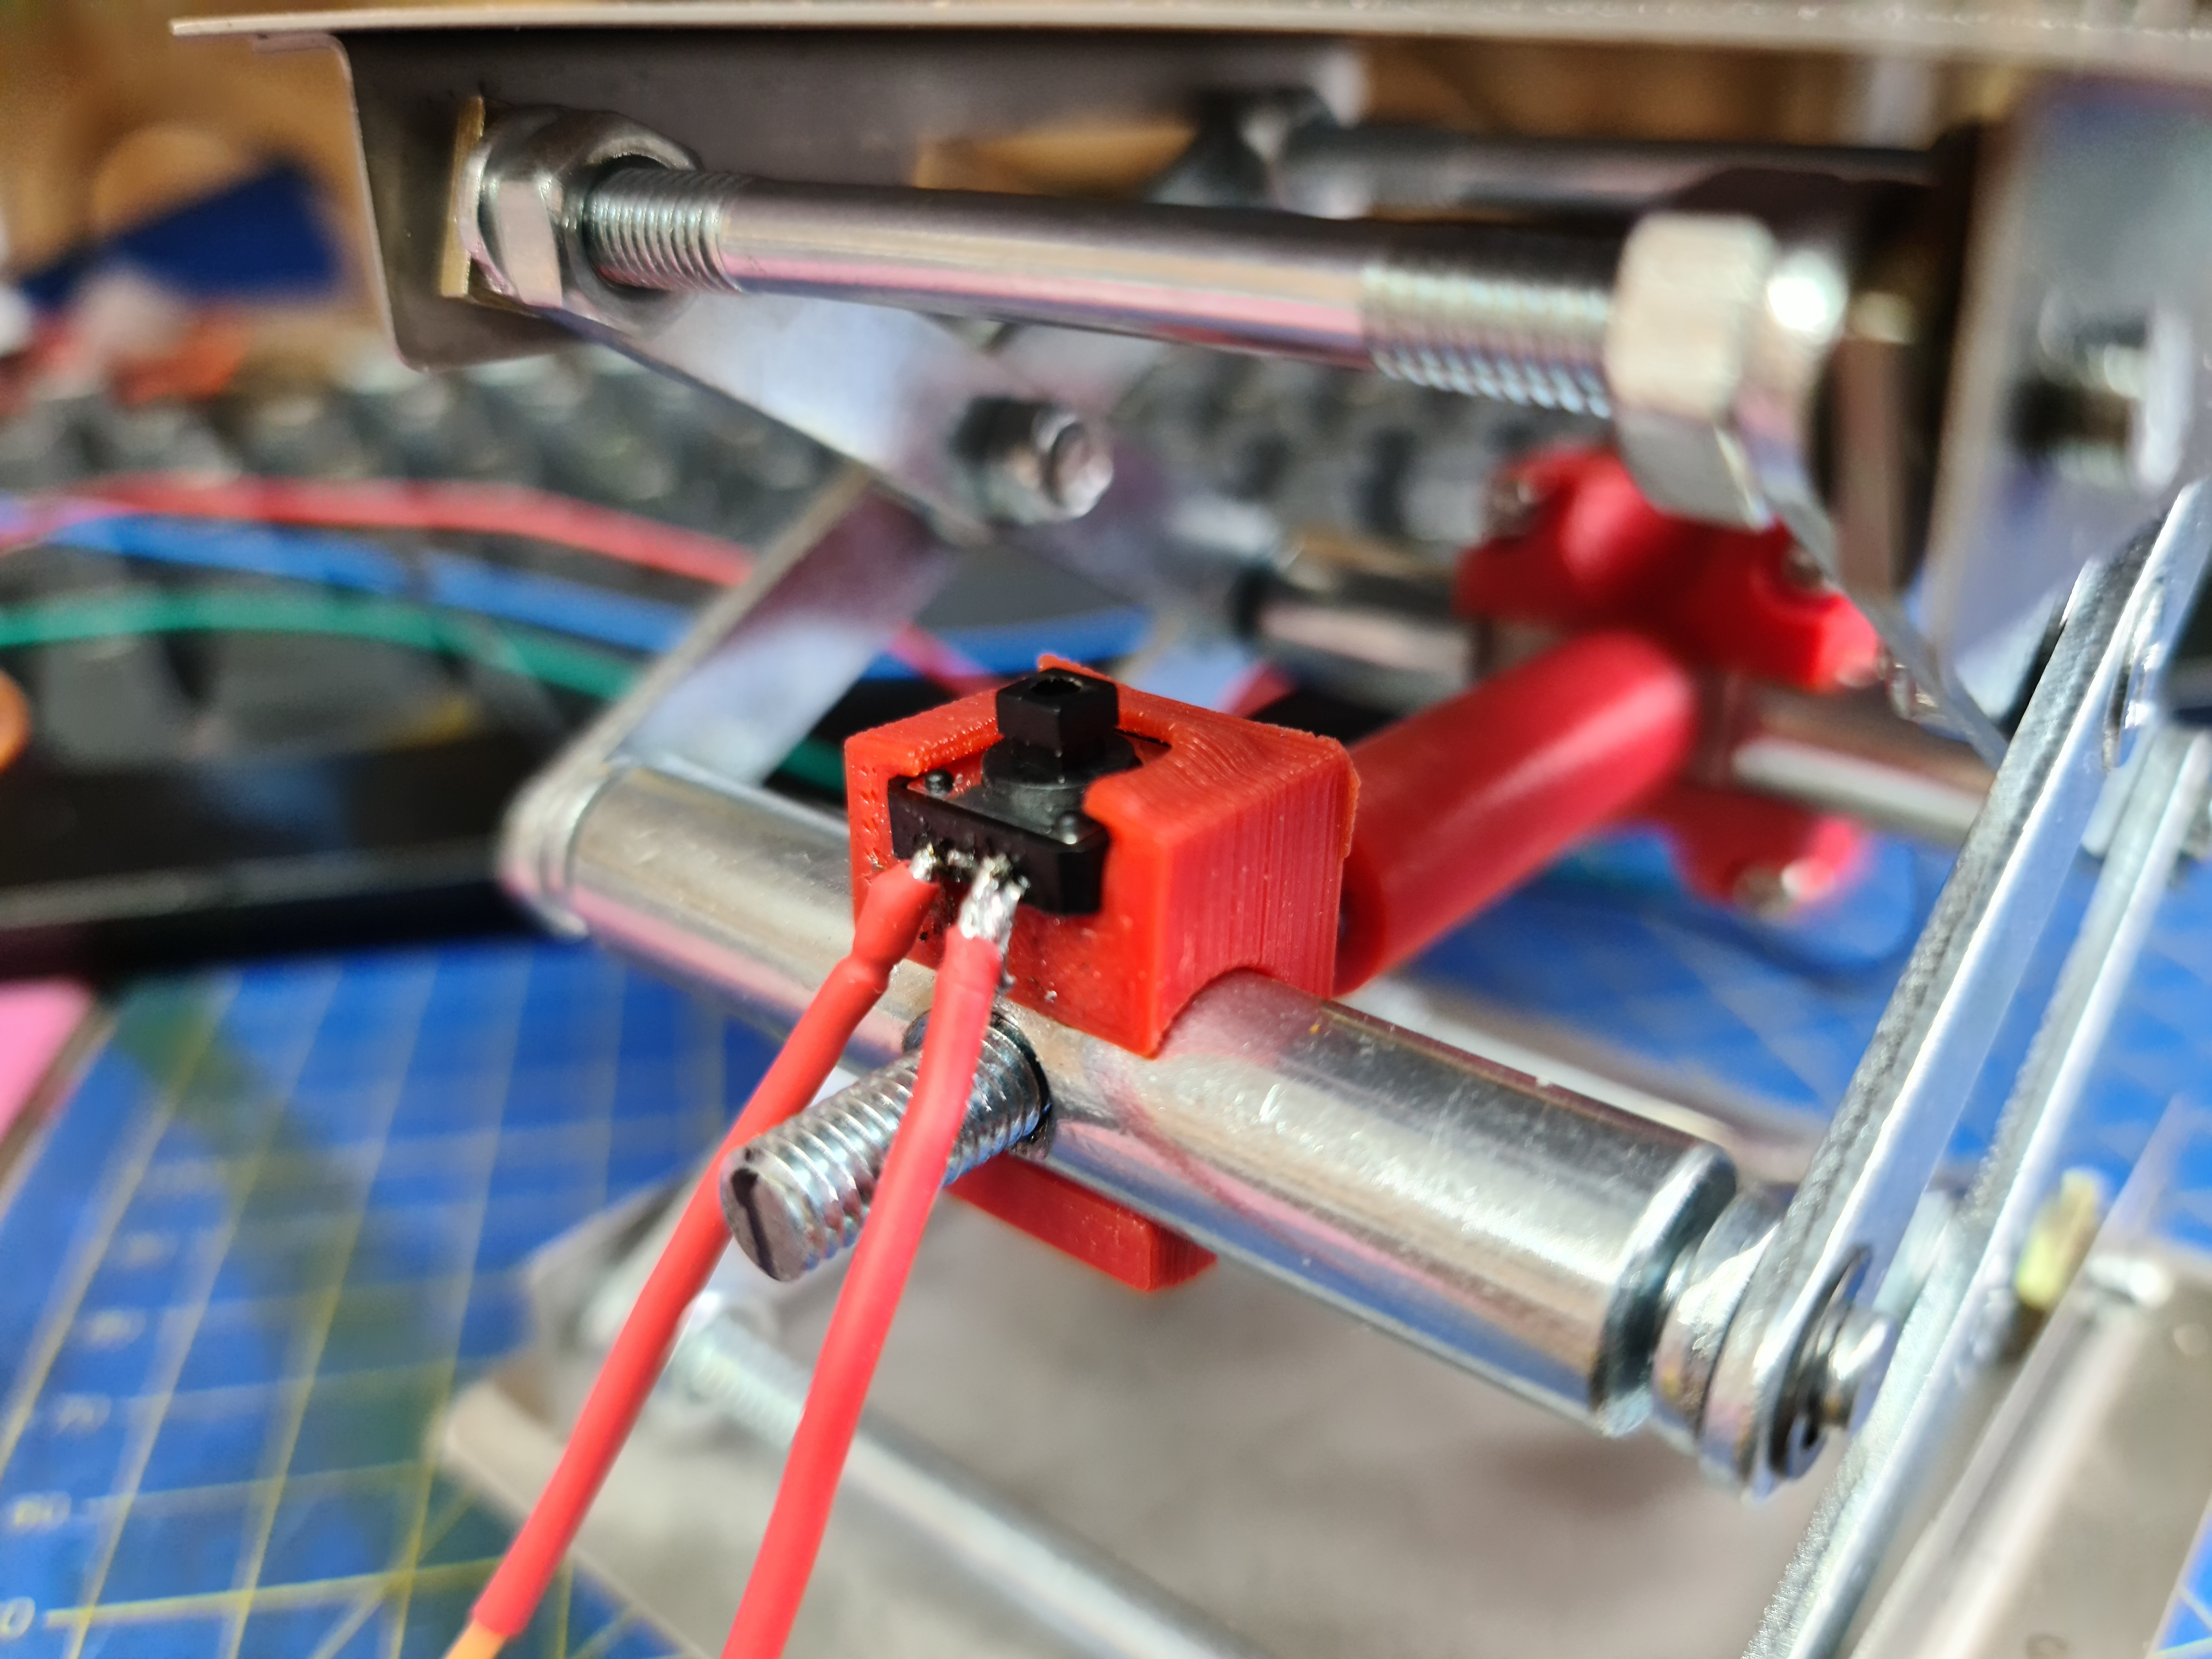 You can see the end-stop here, mounted on the horizontal support of the scissor jack. If you’re worried about the duty cycle of the switch in the end-stop, you could replace it with an optical sensor